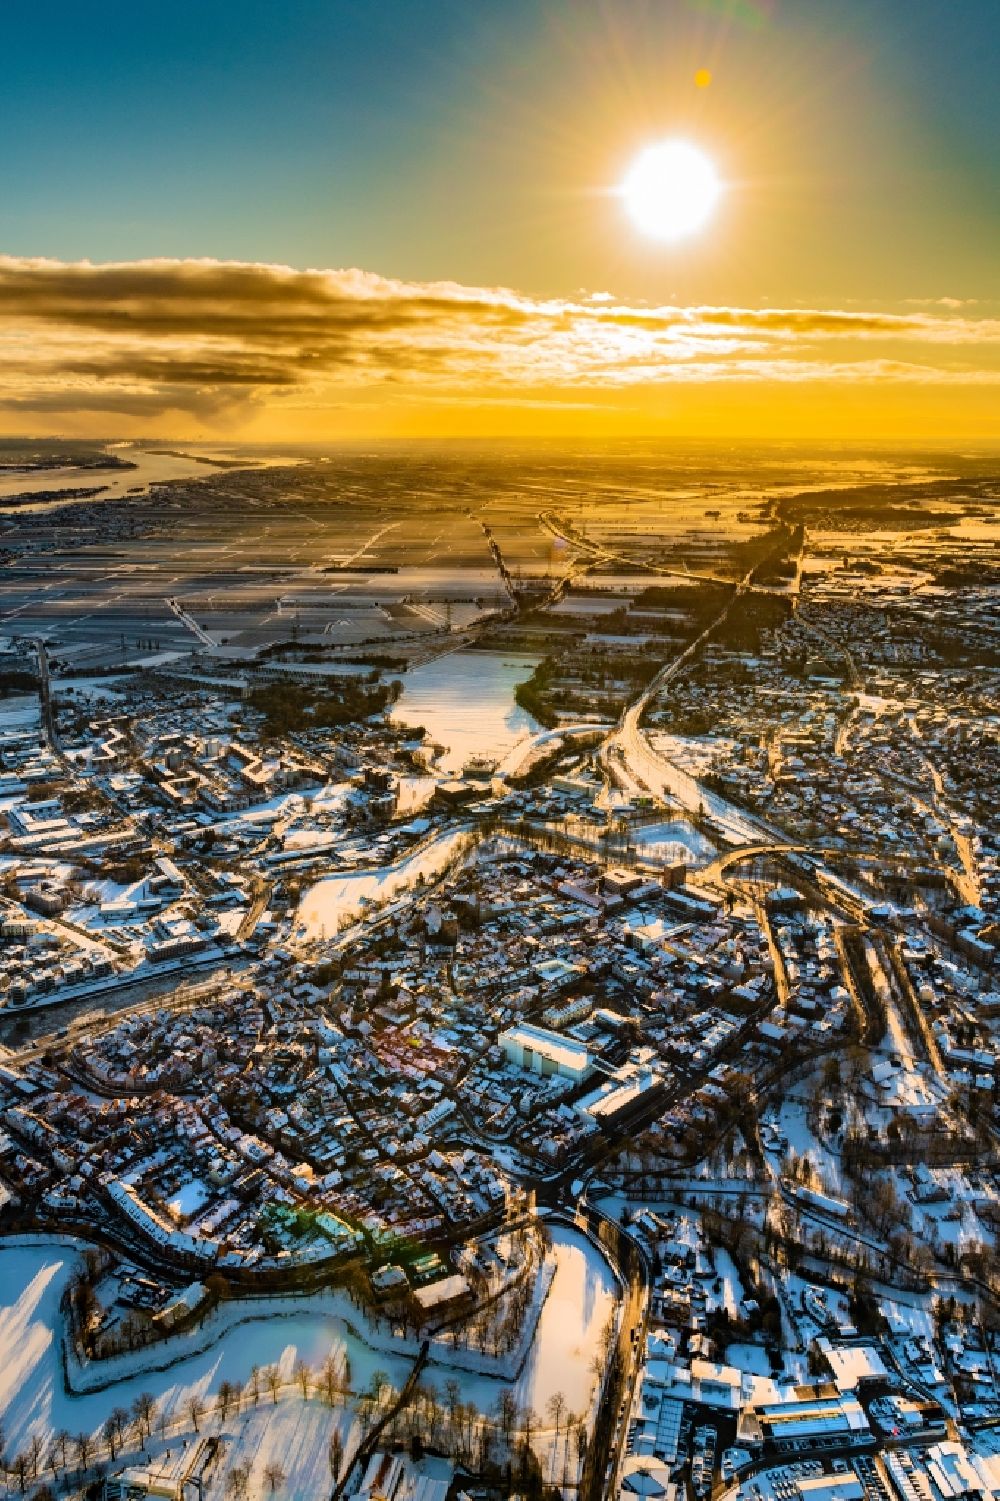 Stade from above - Wintry snowy old town area and inner city center in Stade in the state Lower Saxony, Germany